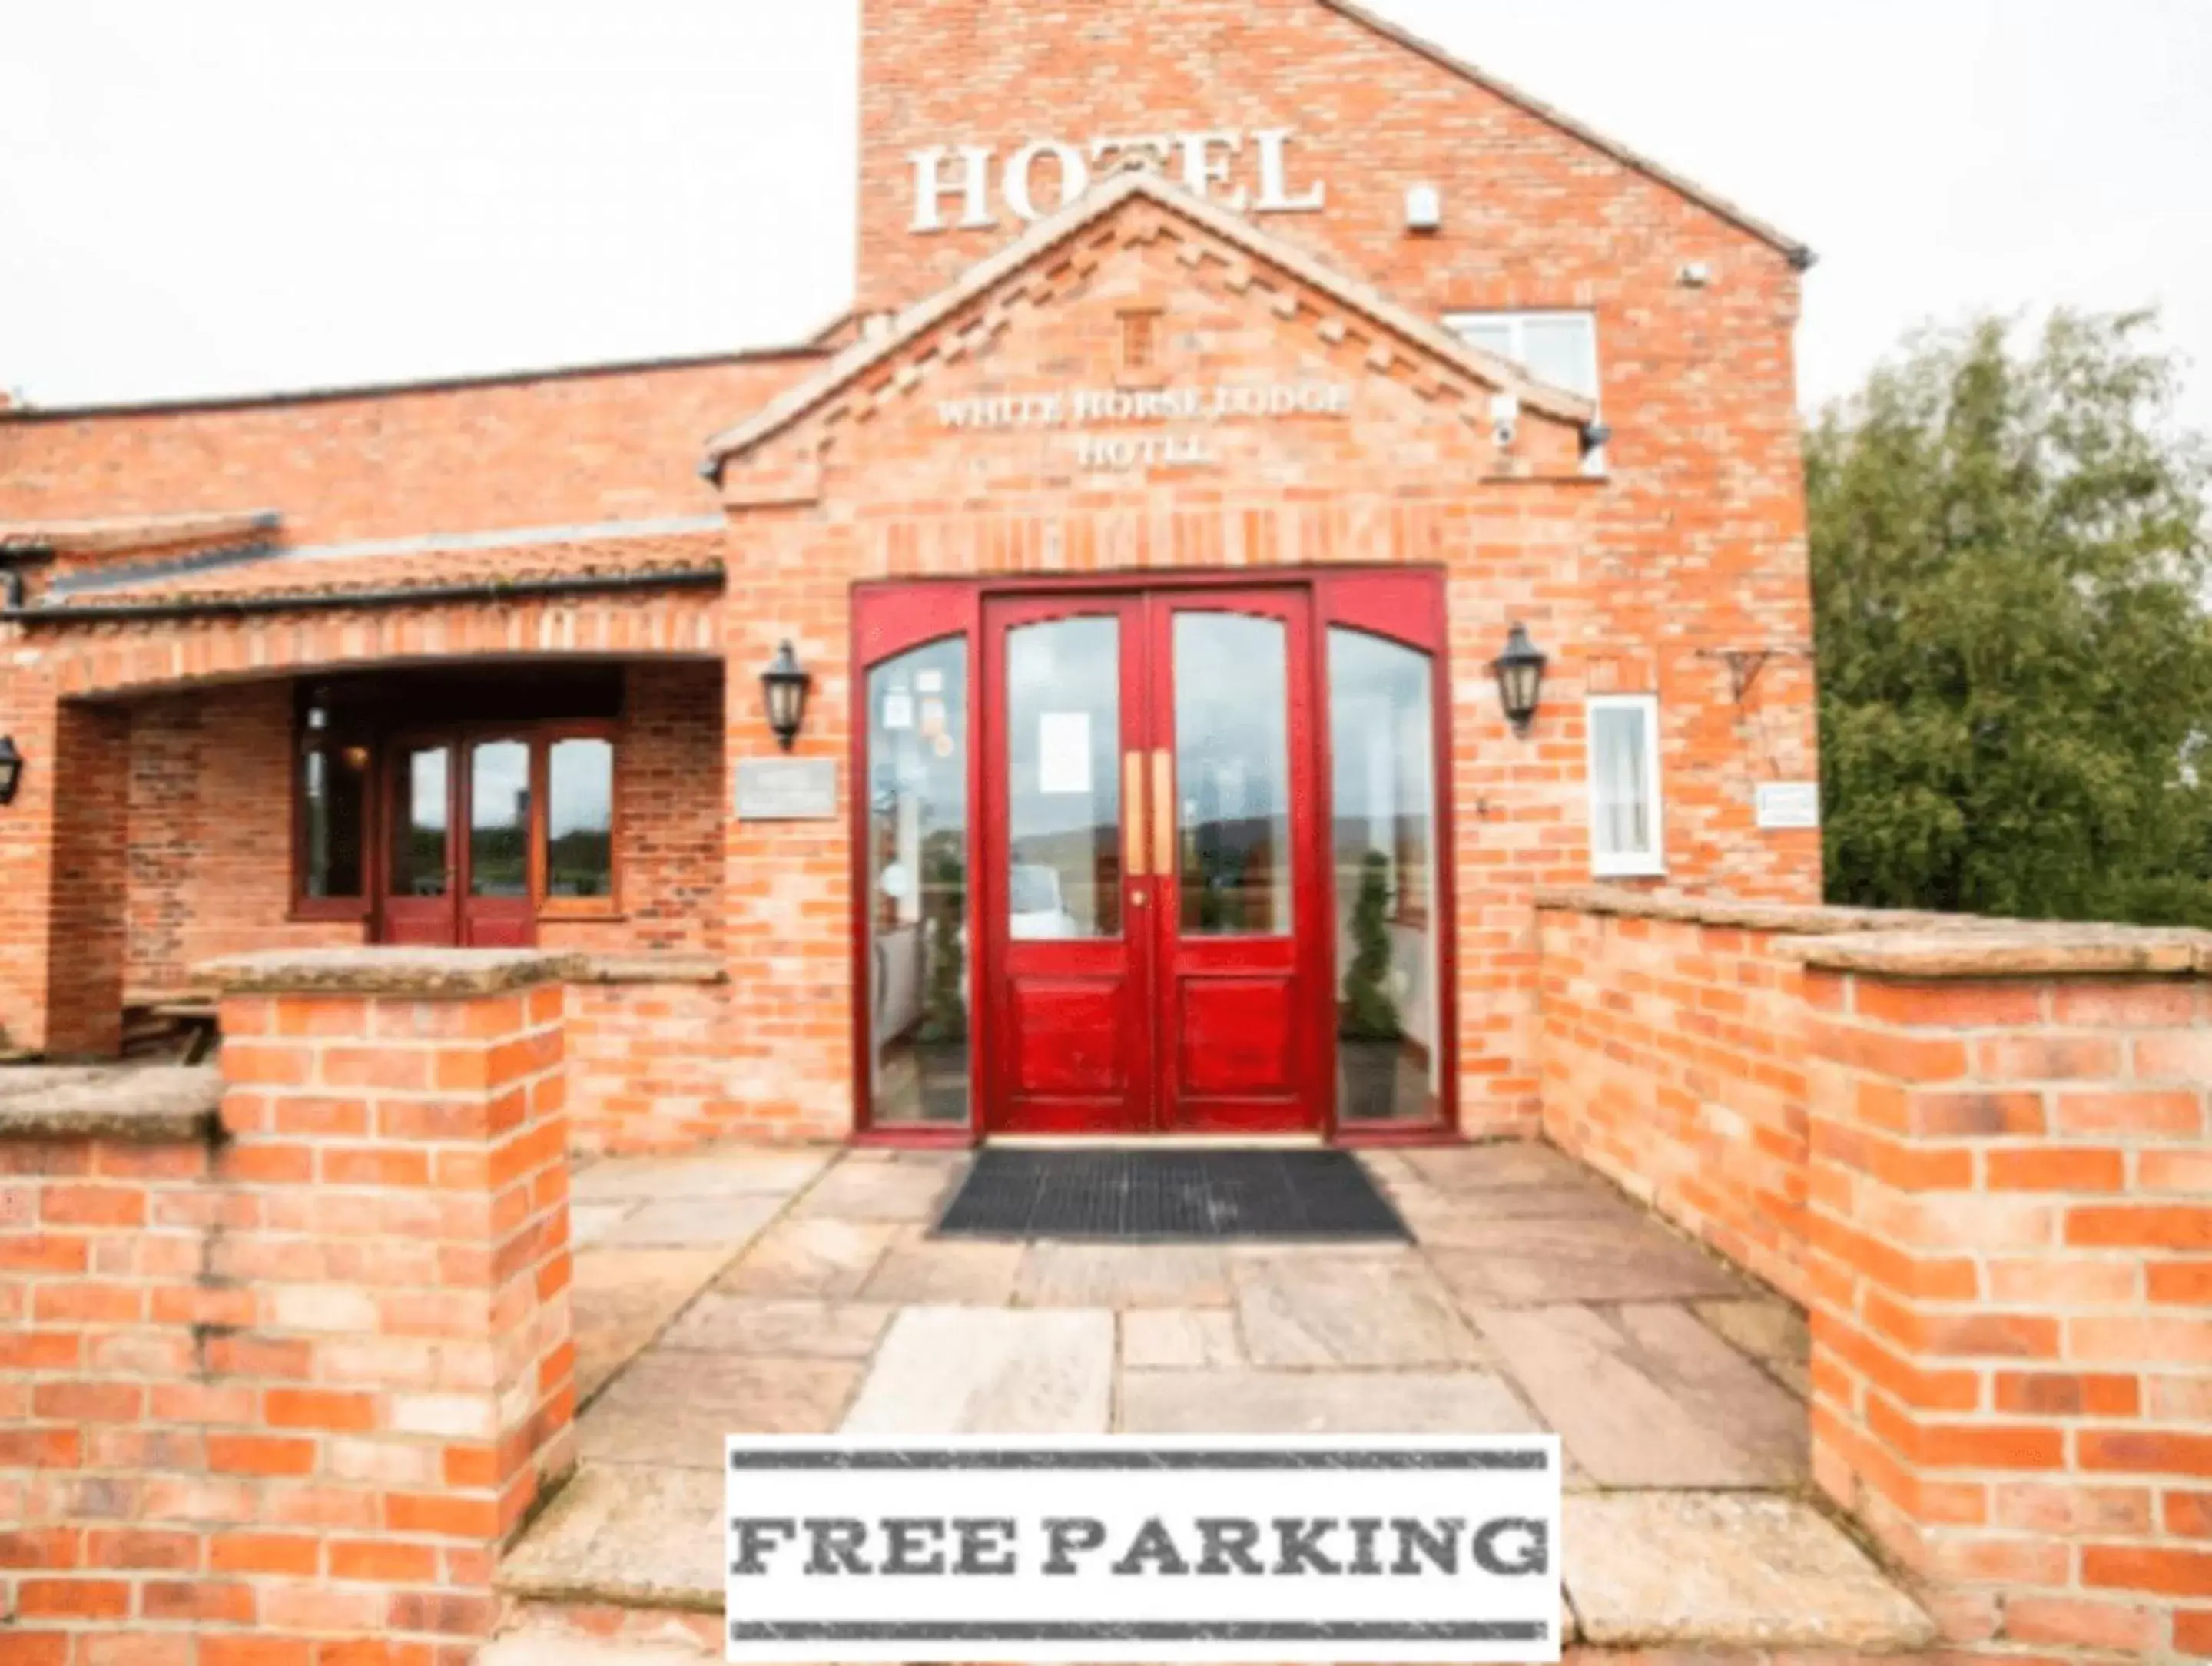 Property building in OYO White Horse Lodge Hotel, East Thirsk